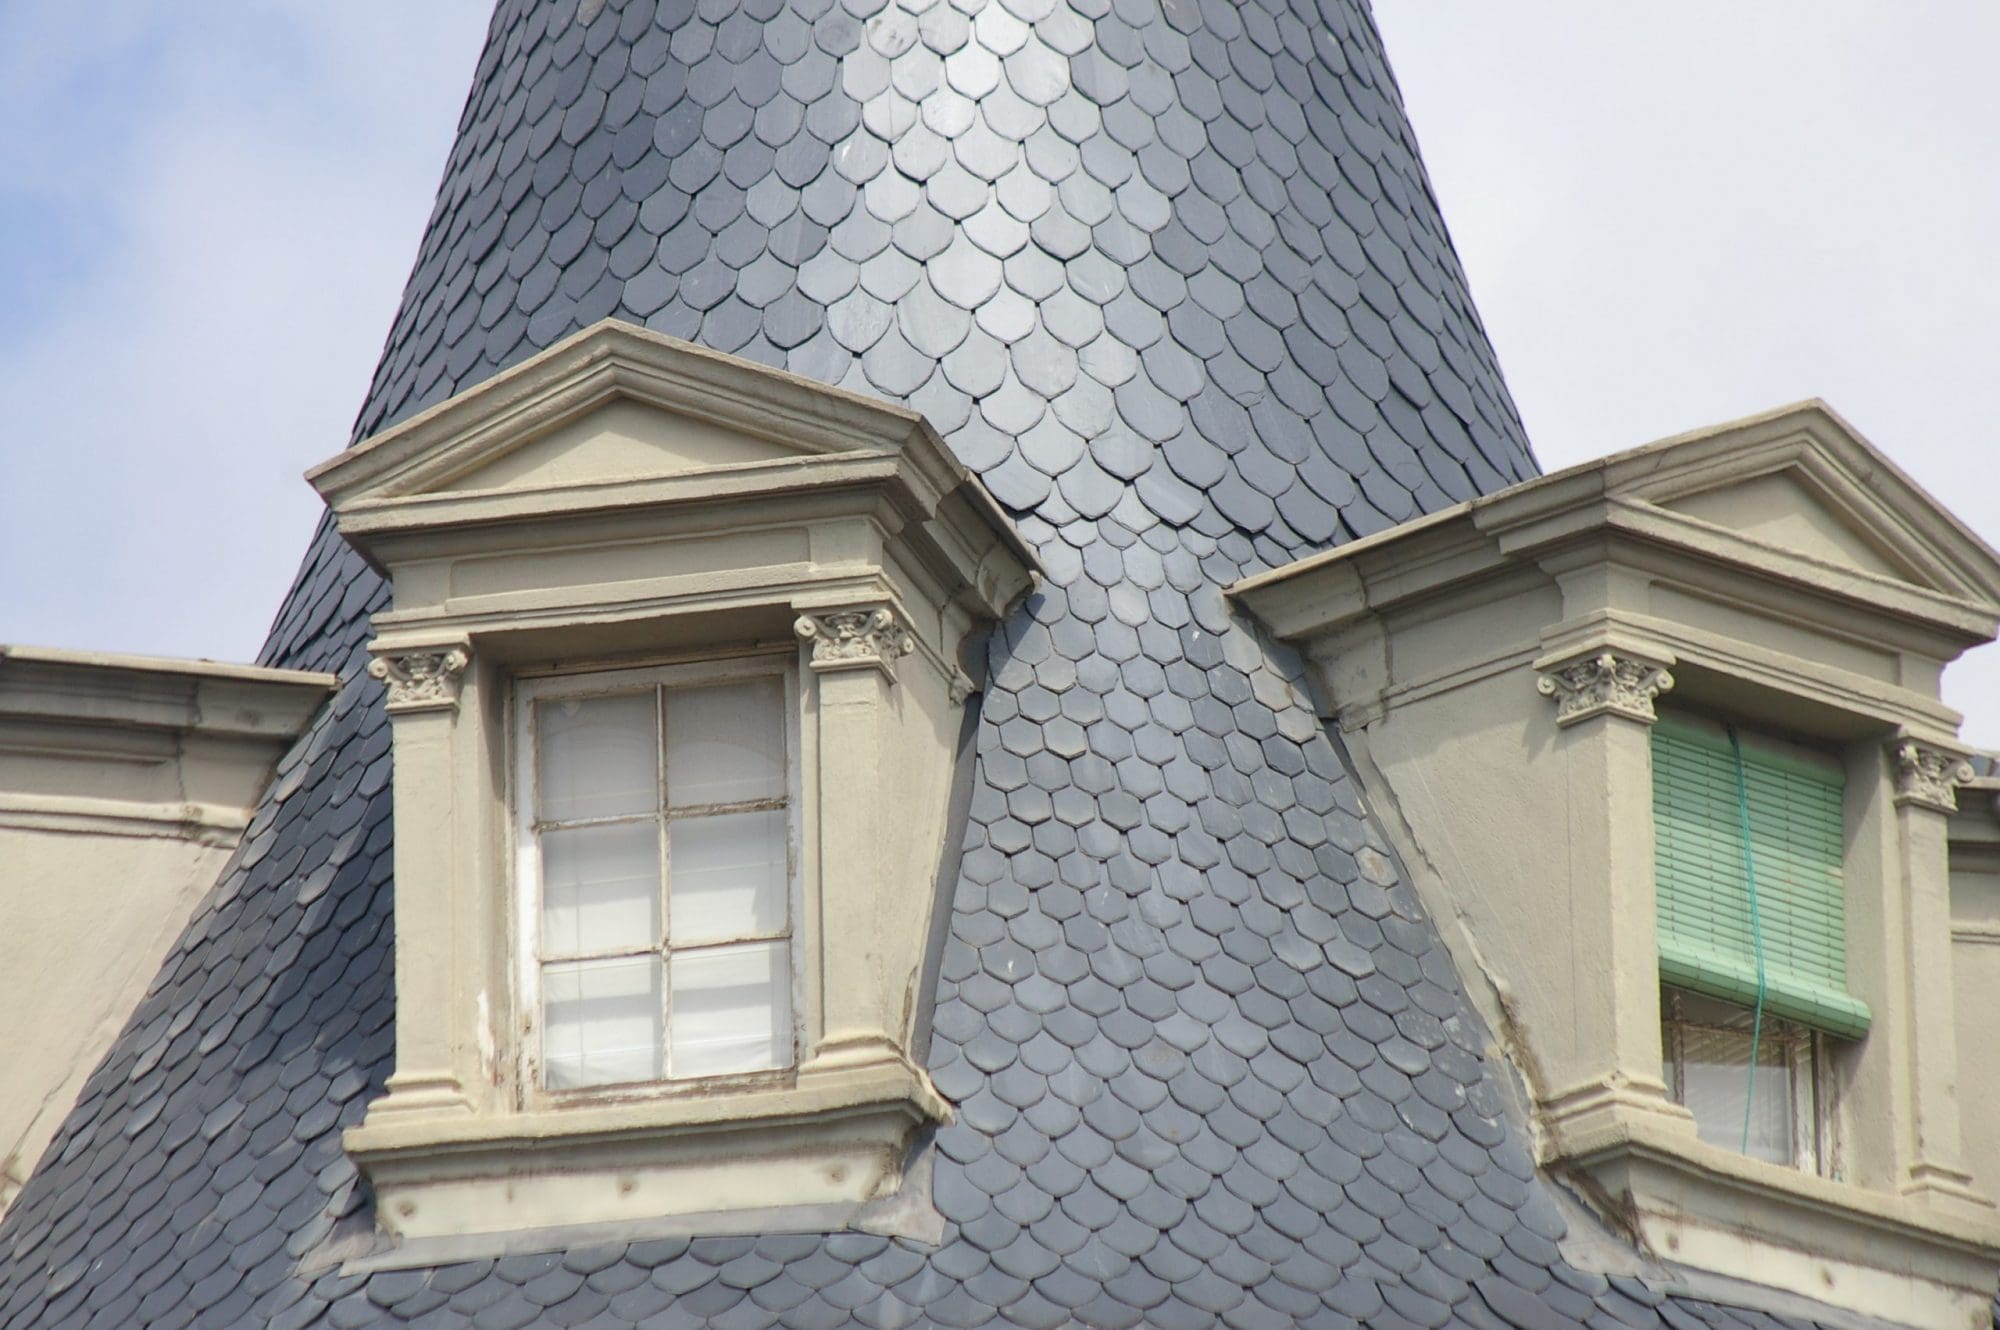 slate roof company st louis stone tile roof roofing contractor contractors company synthetic slate roof composite stone tile roofing chesterfield eureka missouri